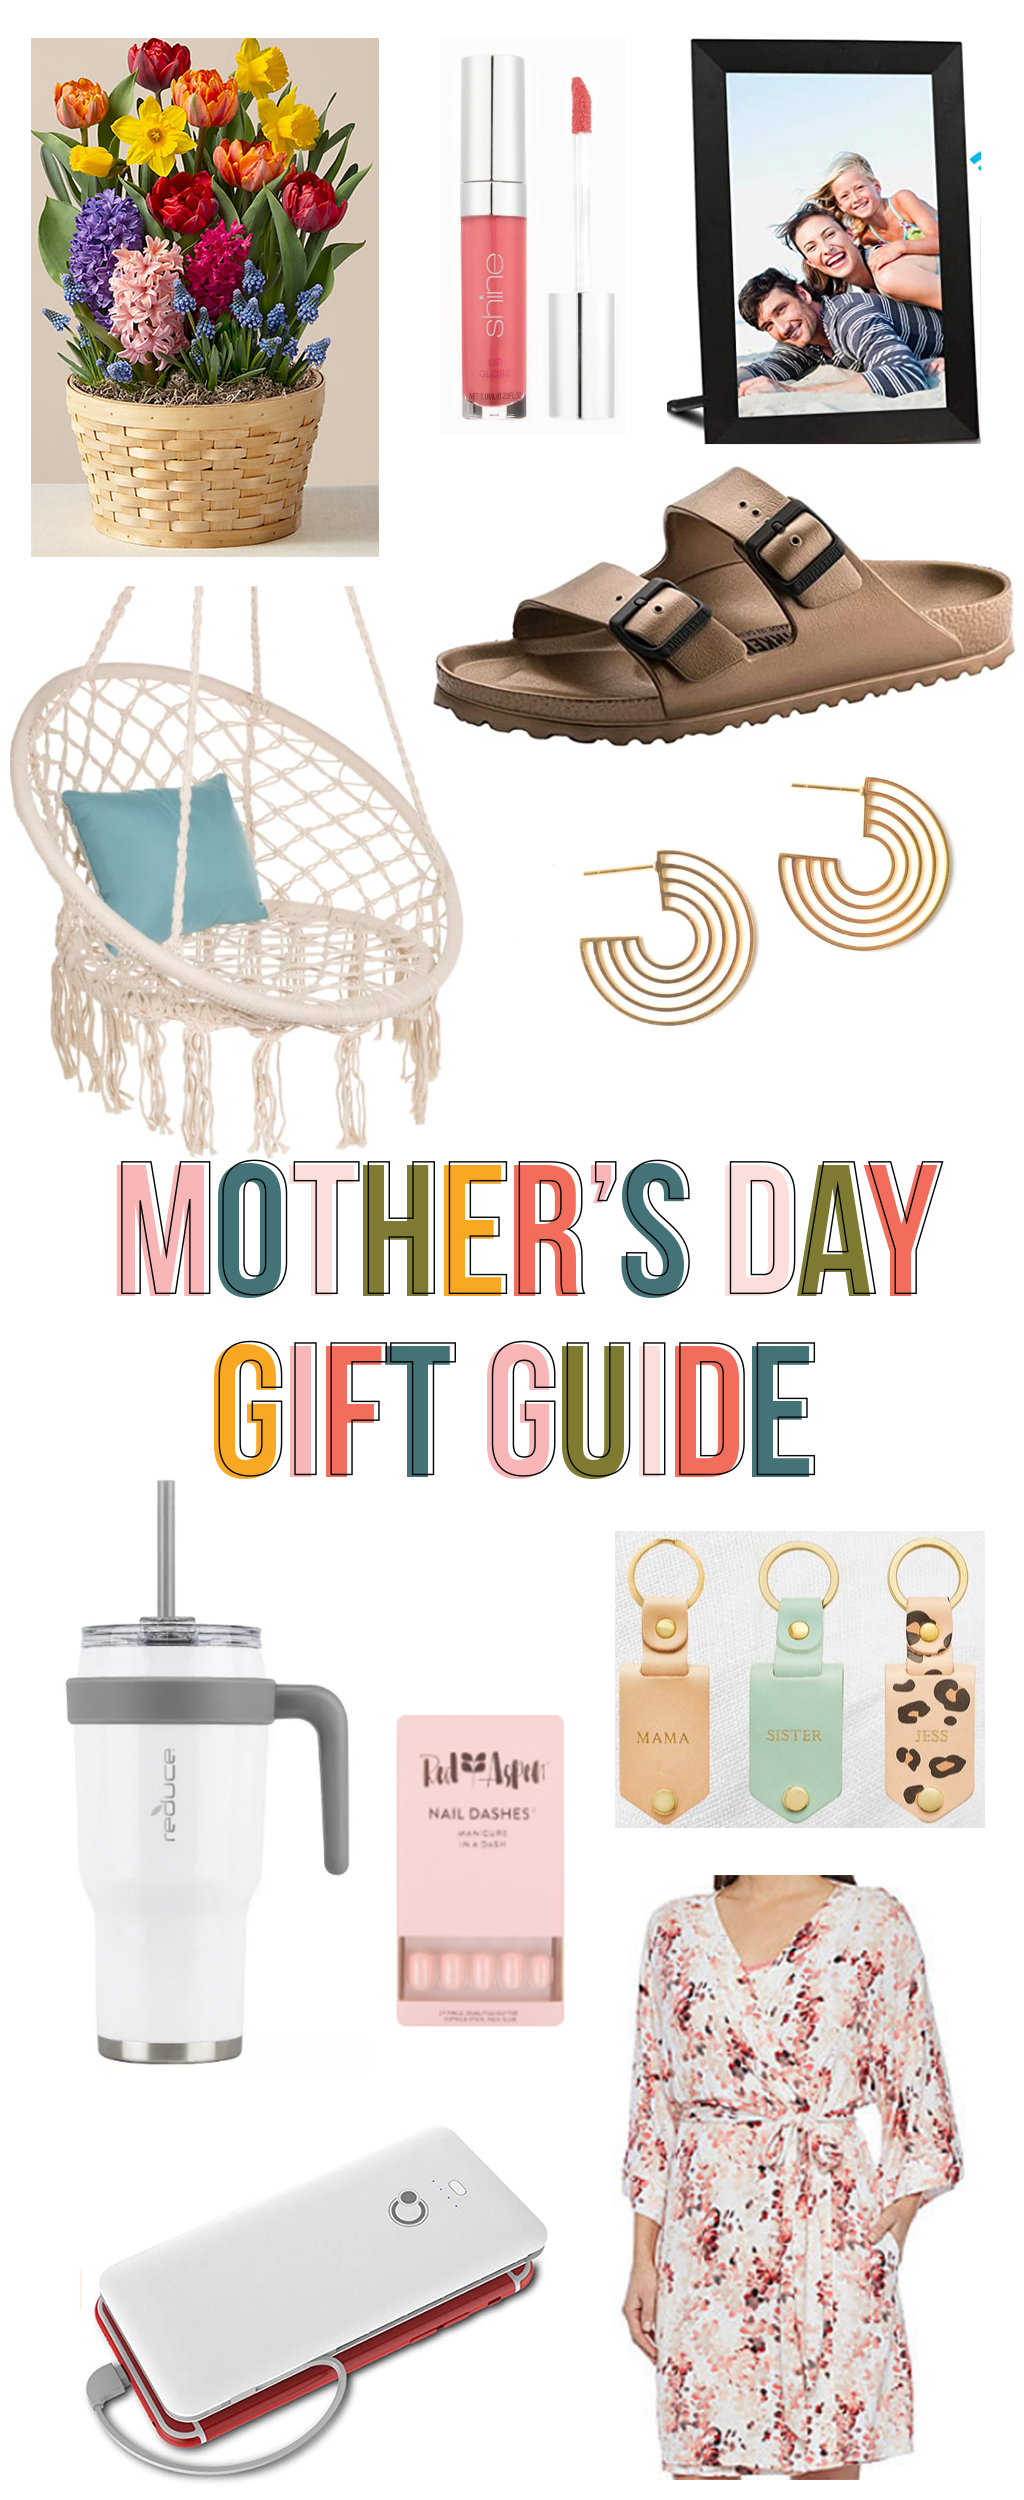 The Ultimate Mother's Day Gift Guide - The Crafting Chicks